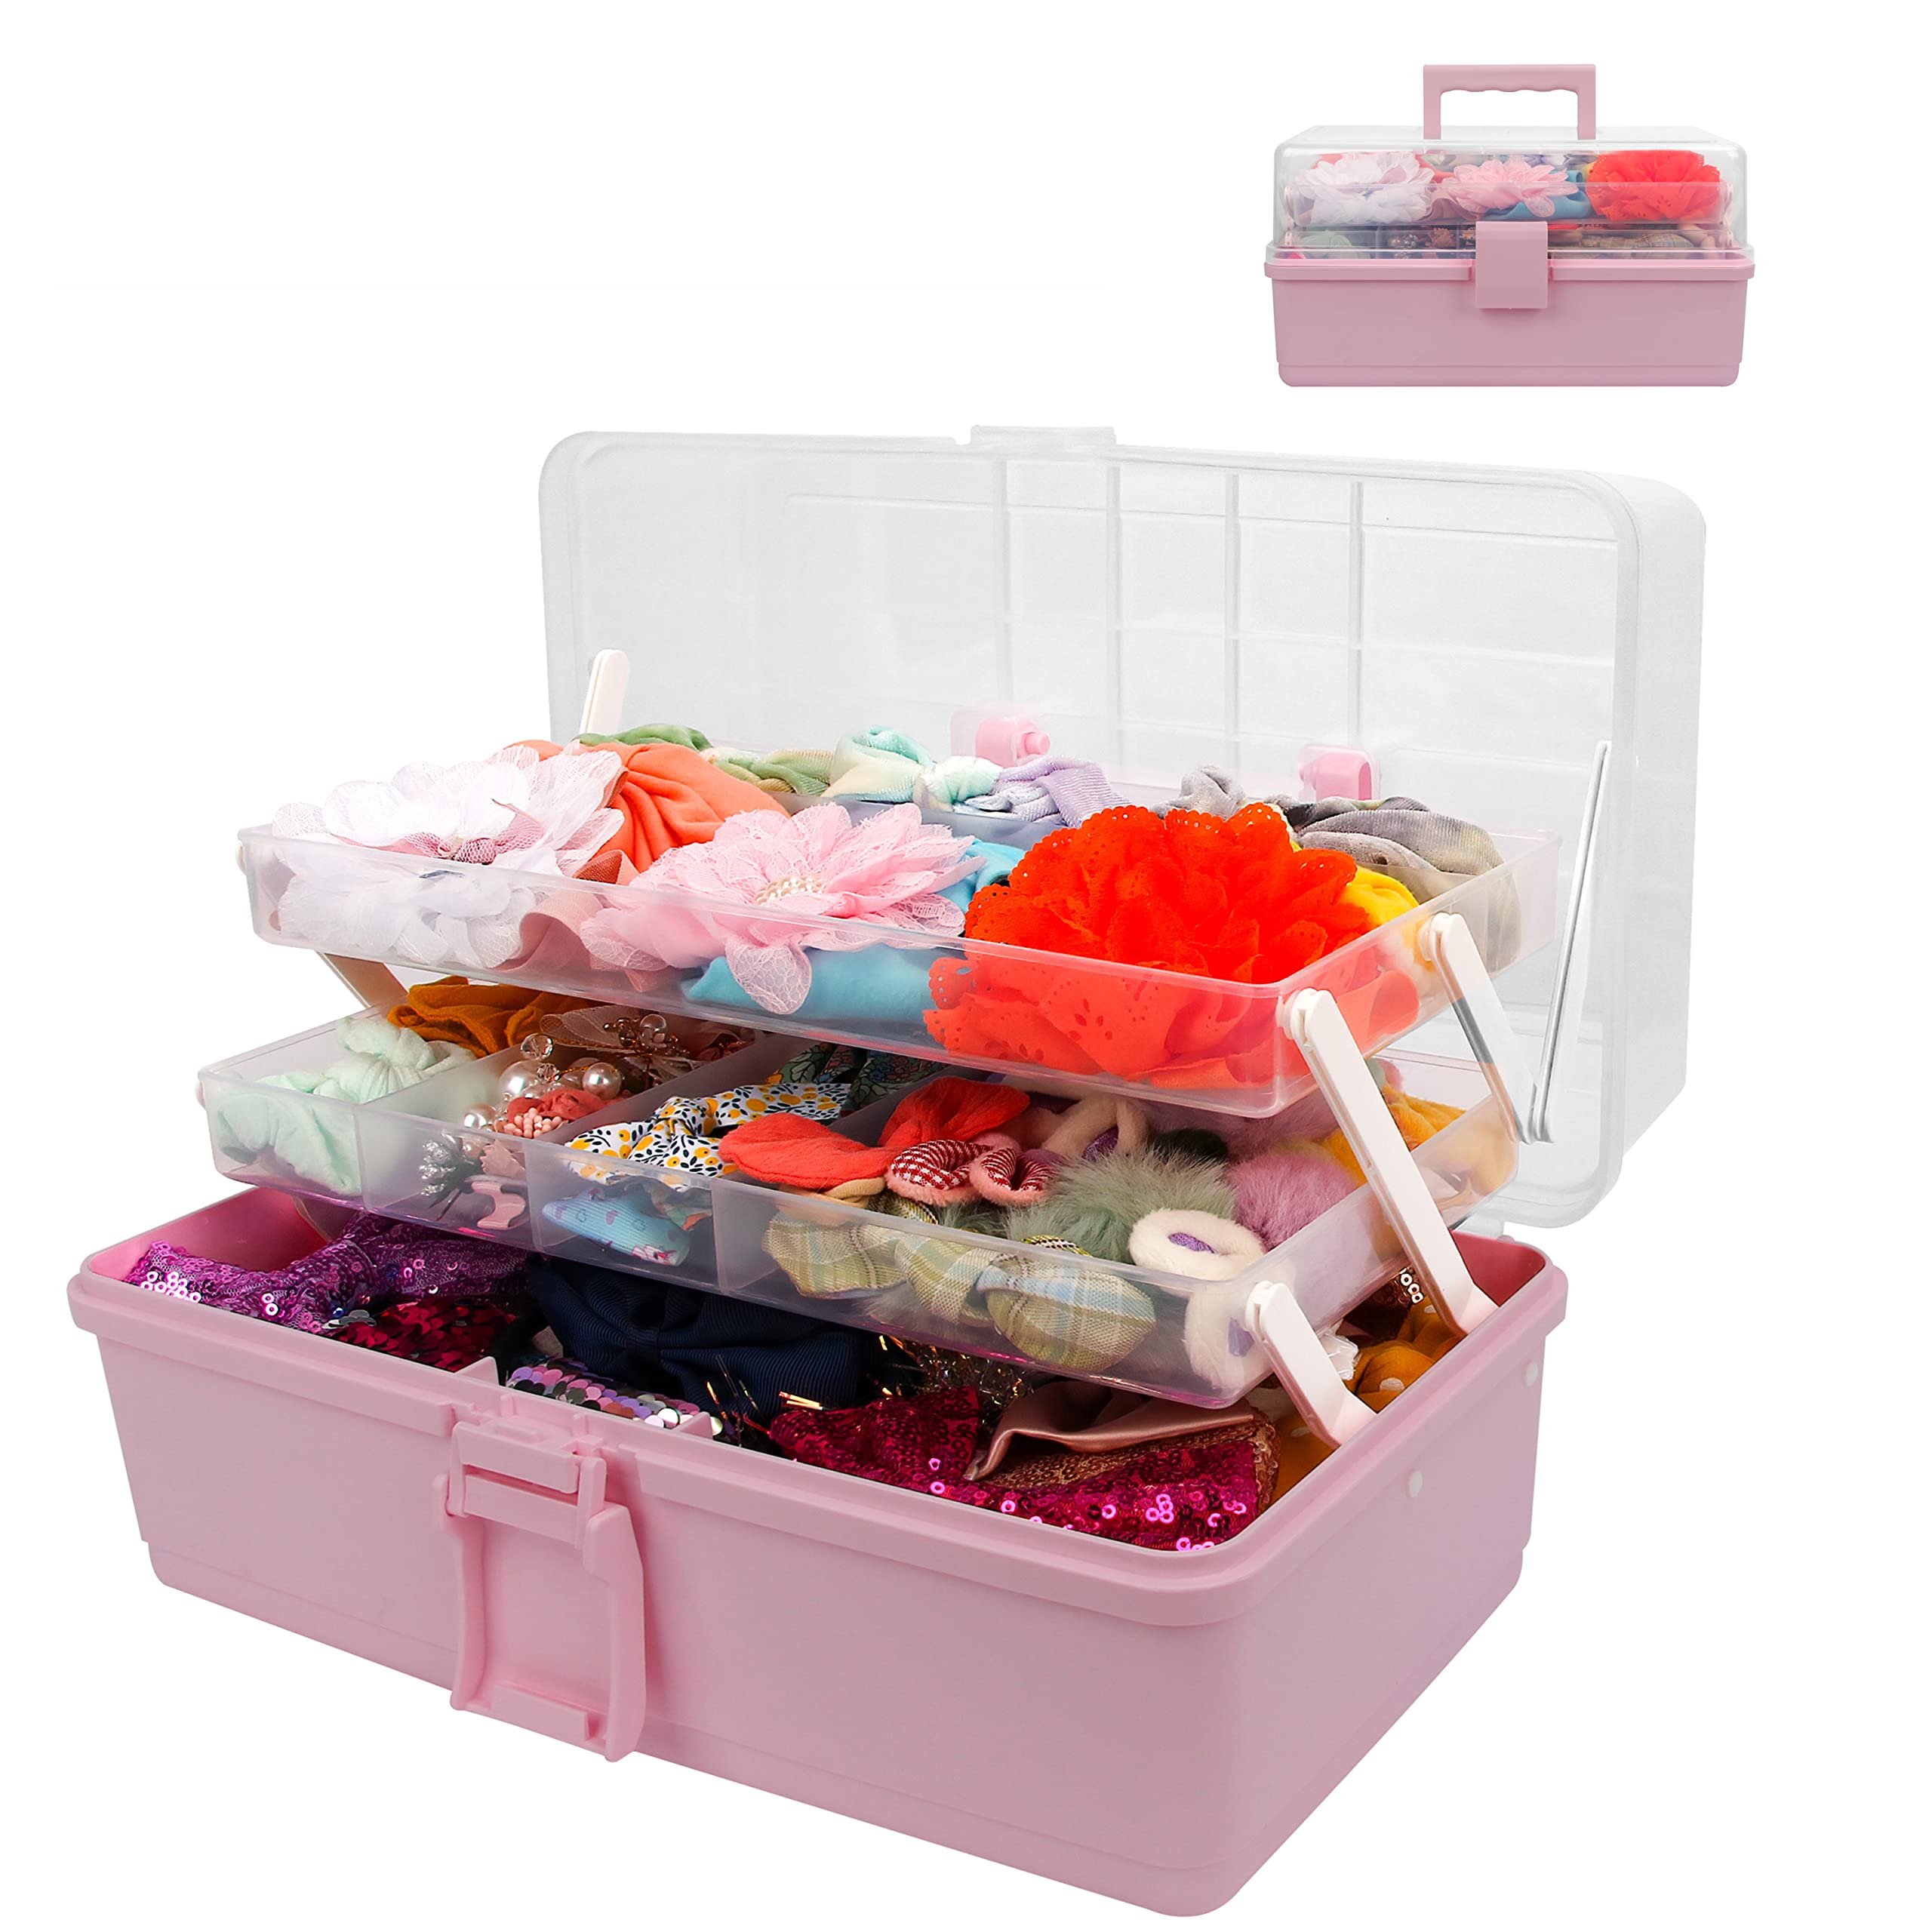 Hair Accessories Organizer | Pink Hair Accessory Jewelry Box For Girls |  Portable Travel Hair Accessories Storage For Hairband Hair Ties Clips  Organiz